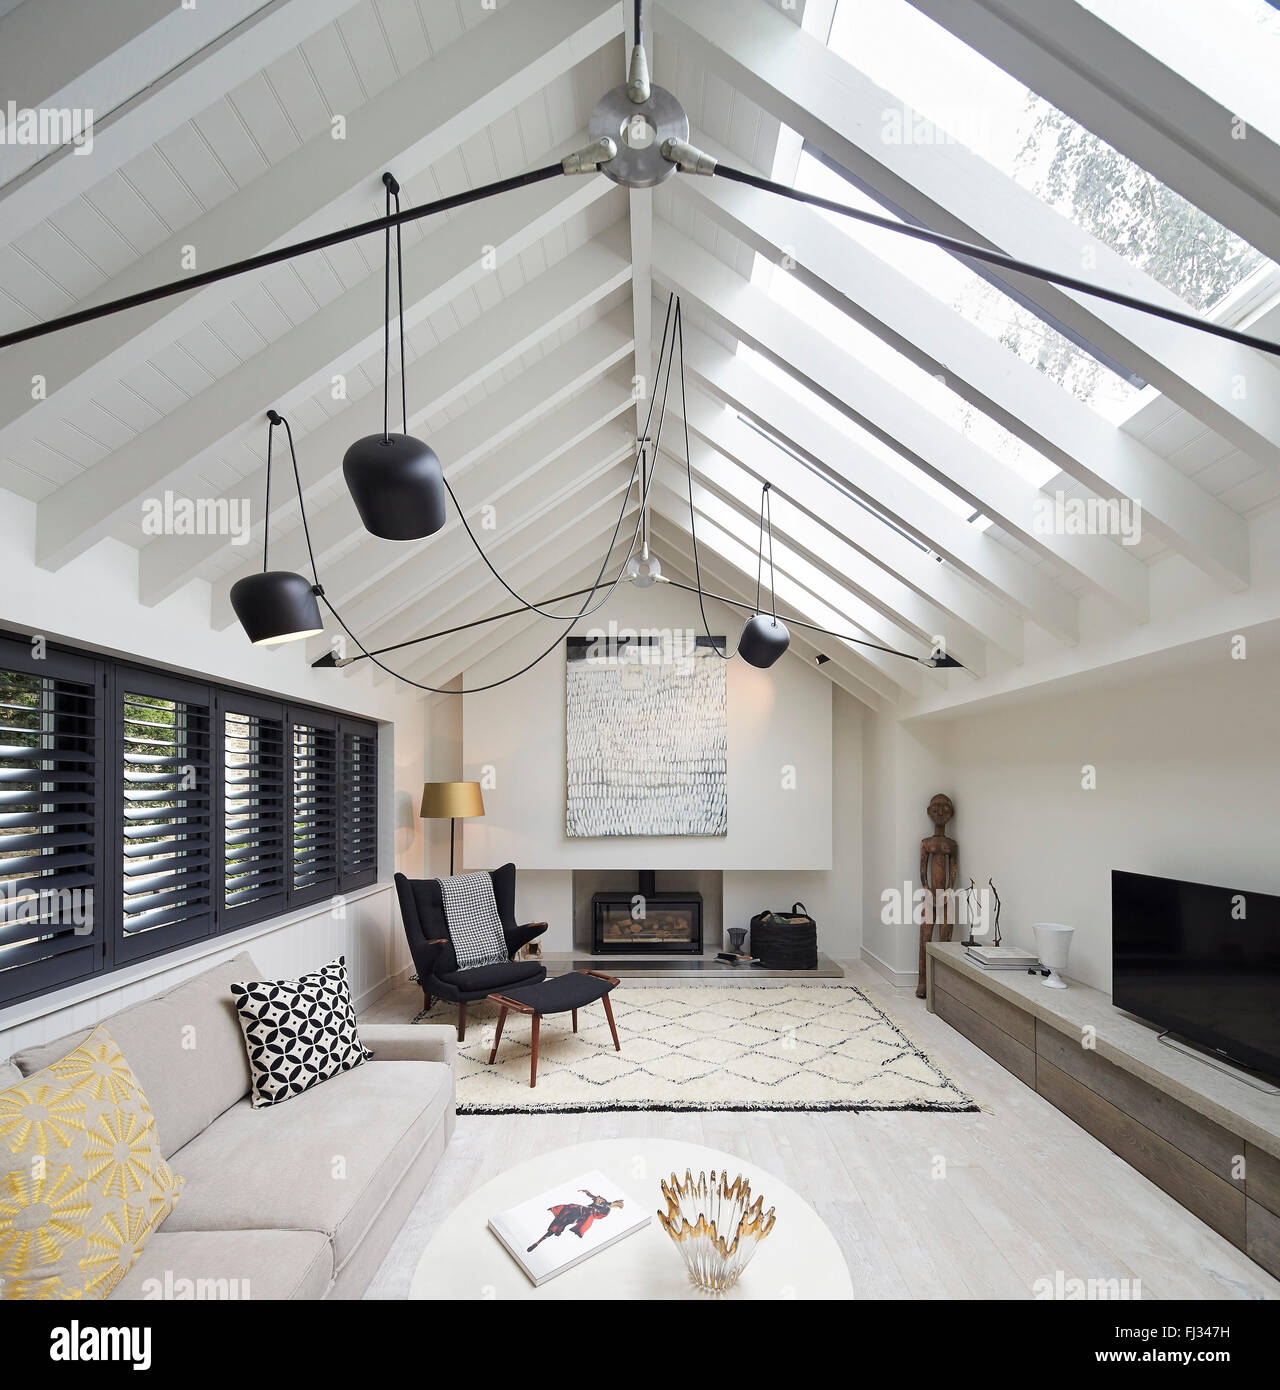 Living space with exposed gabled ceiling. Orleans Road, Twickenham, United Kingdom. Architect: Burwell Deakins Architects, 2015. Stock Photo